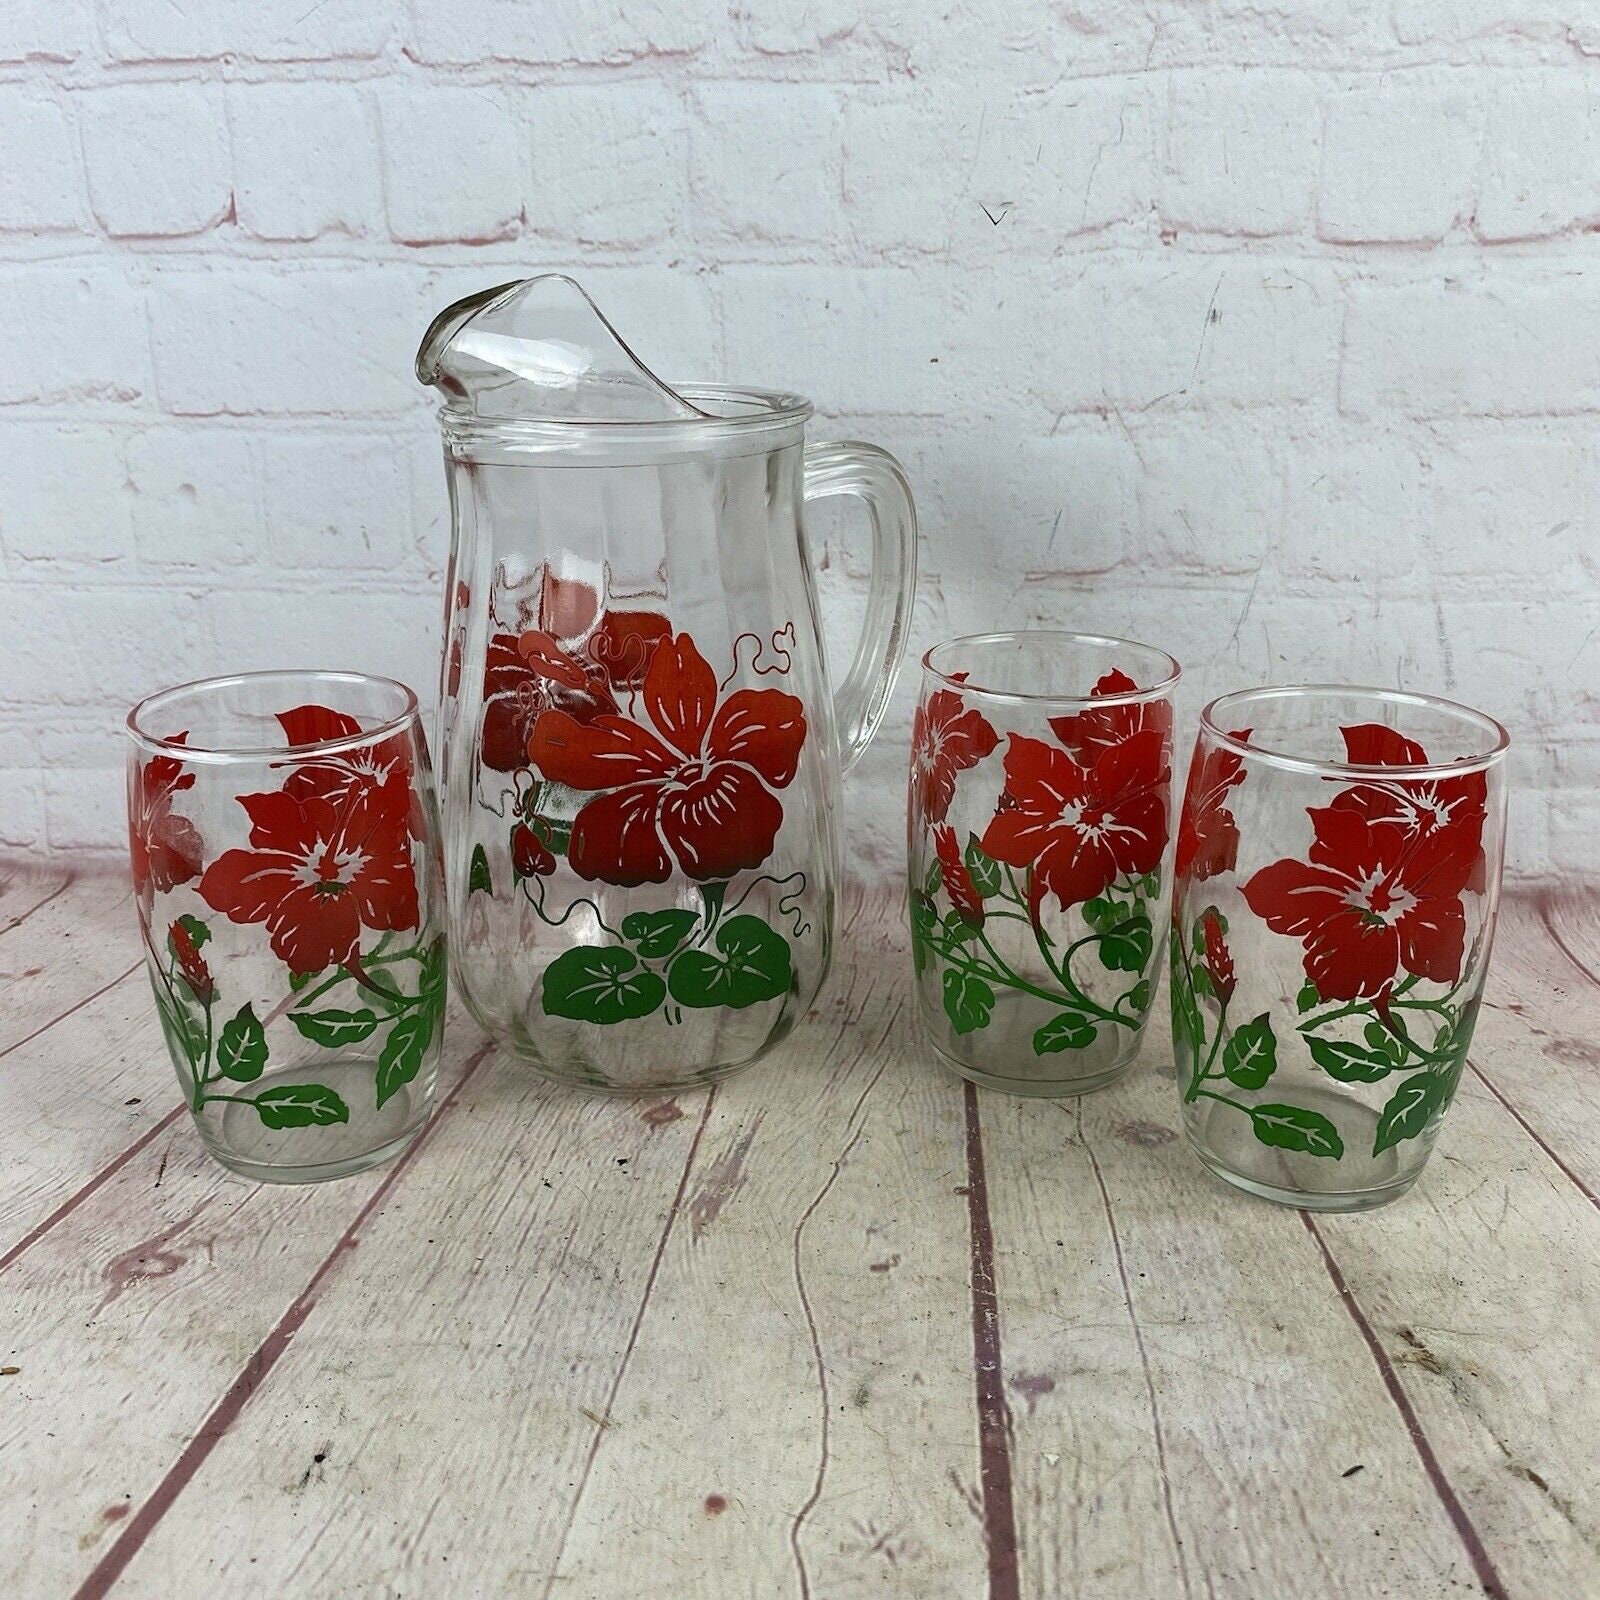 Vintage 1950s to 1960s Clear Glass Beverage Carafe Red Rose Anchor